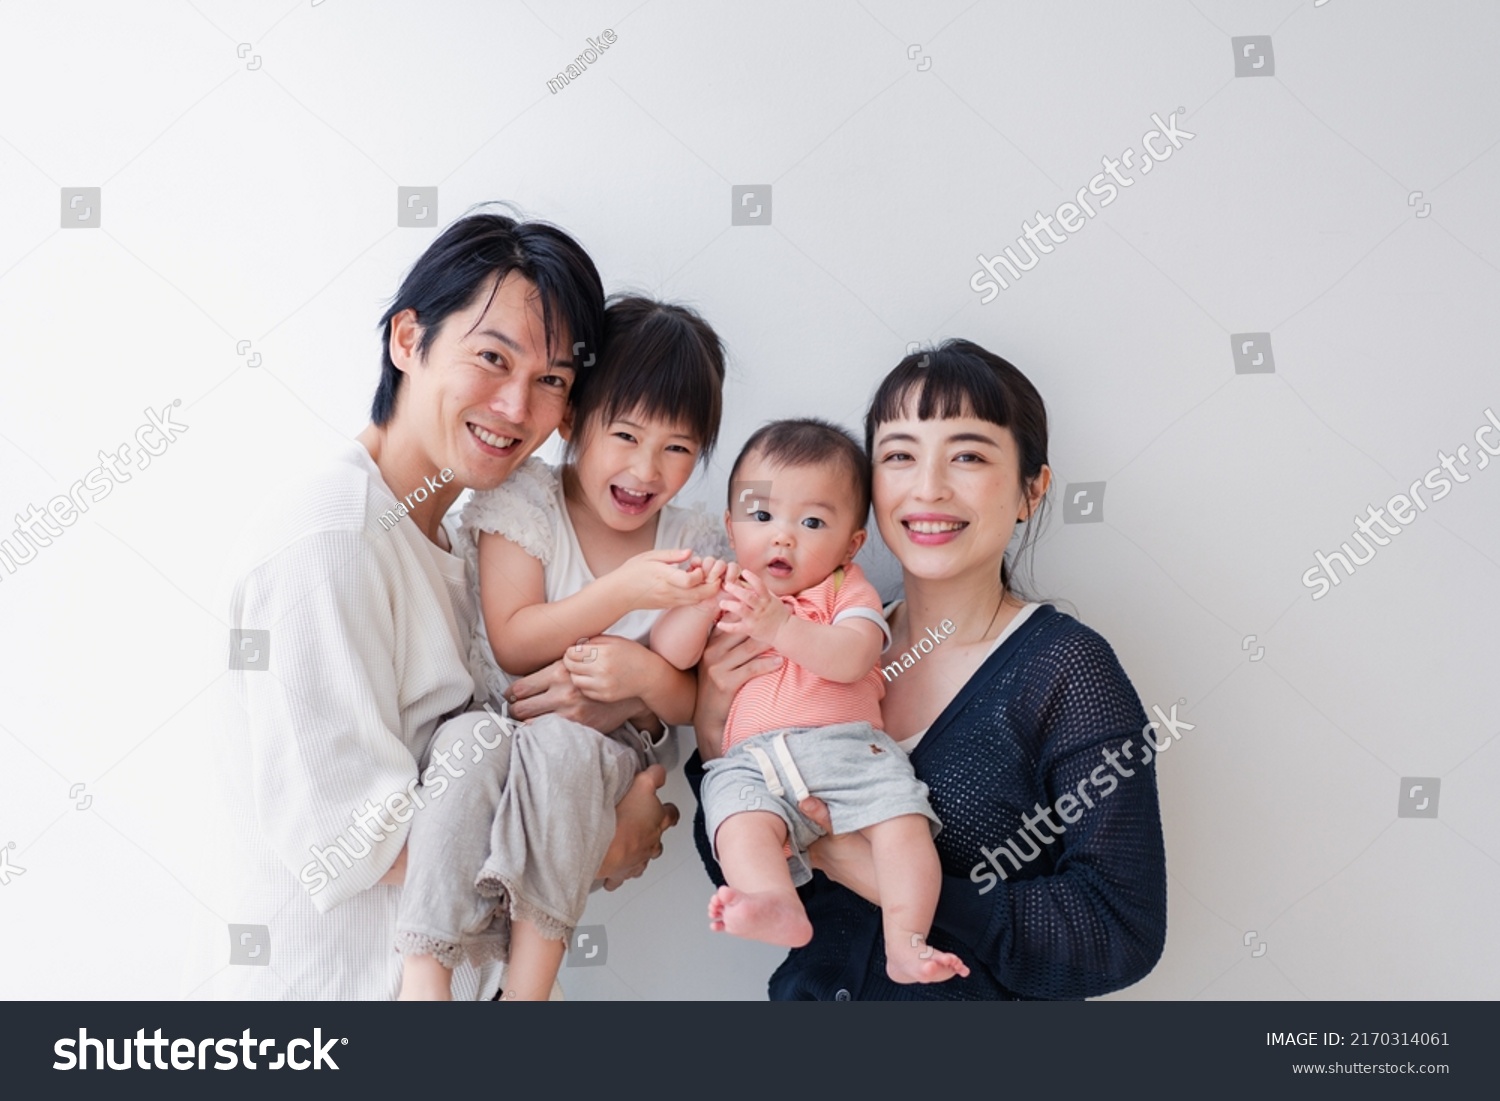 Family with babies in a group photo #2170314061